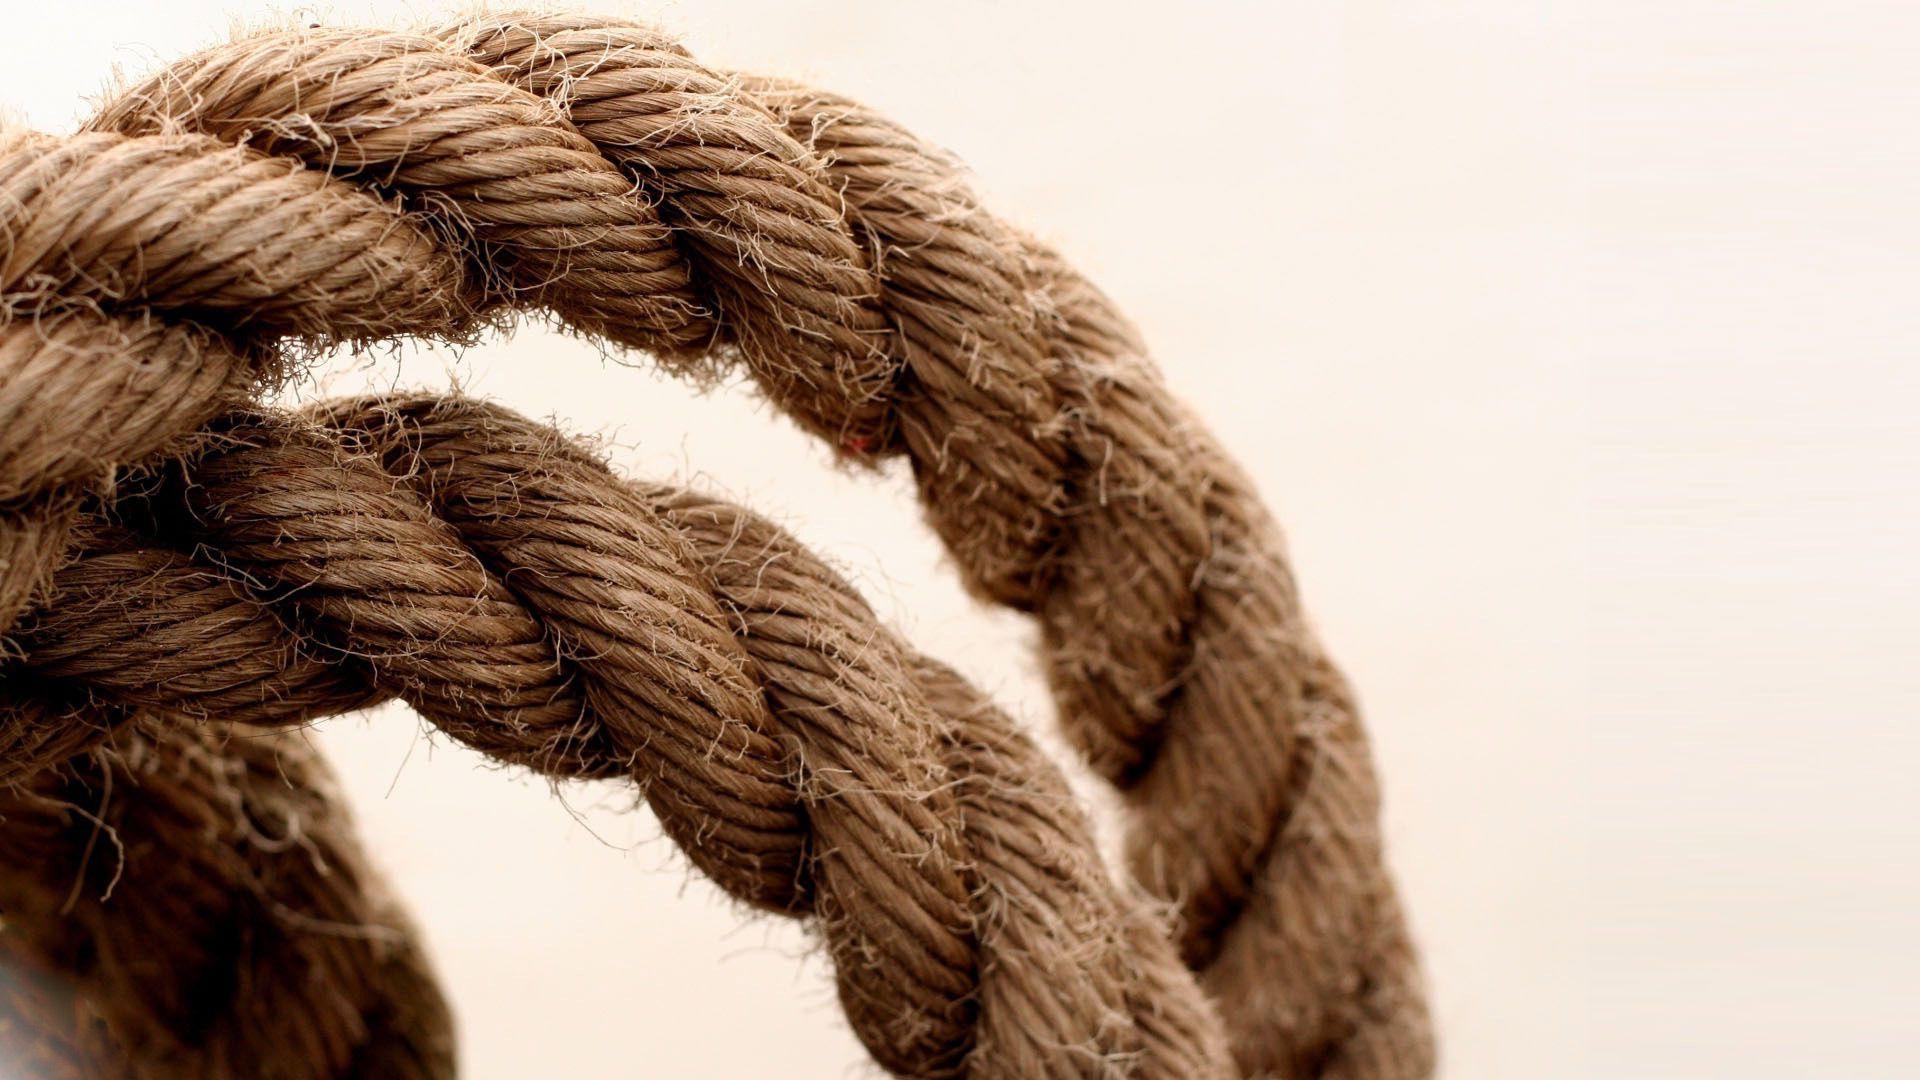 Rope Texture Wallpaper 54243 1920x1080 px